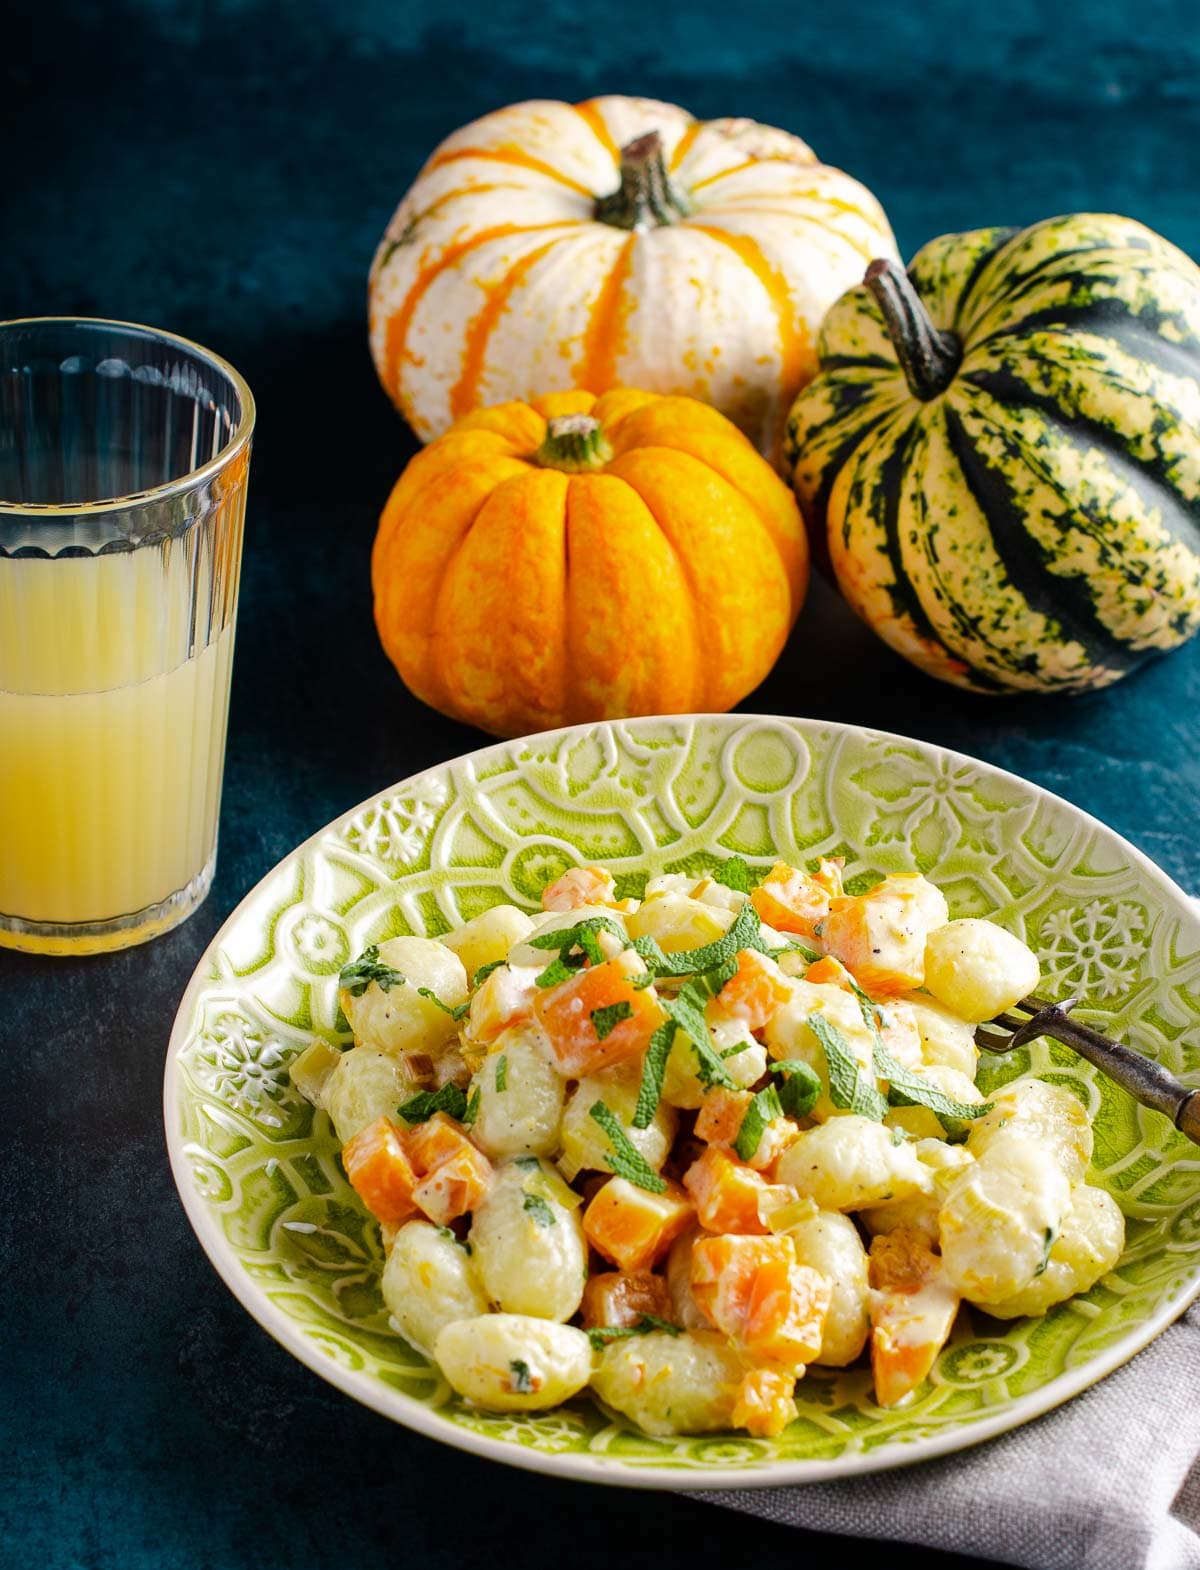 A plate of creamy gnocchi with pan fried pumpkin pieces and sage served an an ornate green plate, with a glass of orange juice in the back and a mix of orange and green pumpkins to the back.